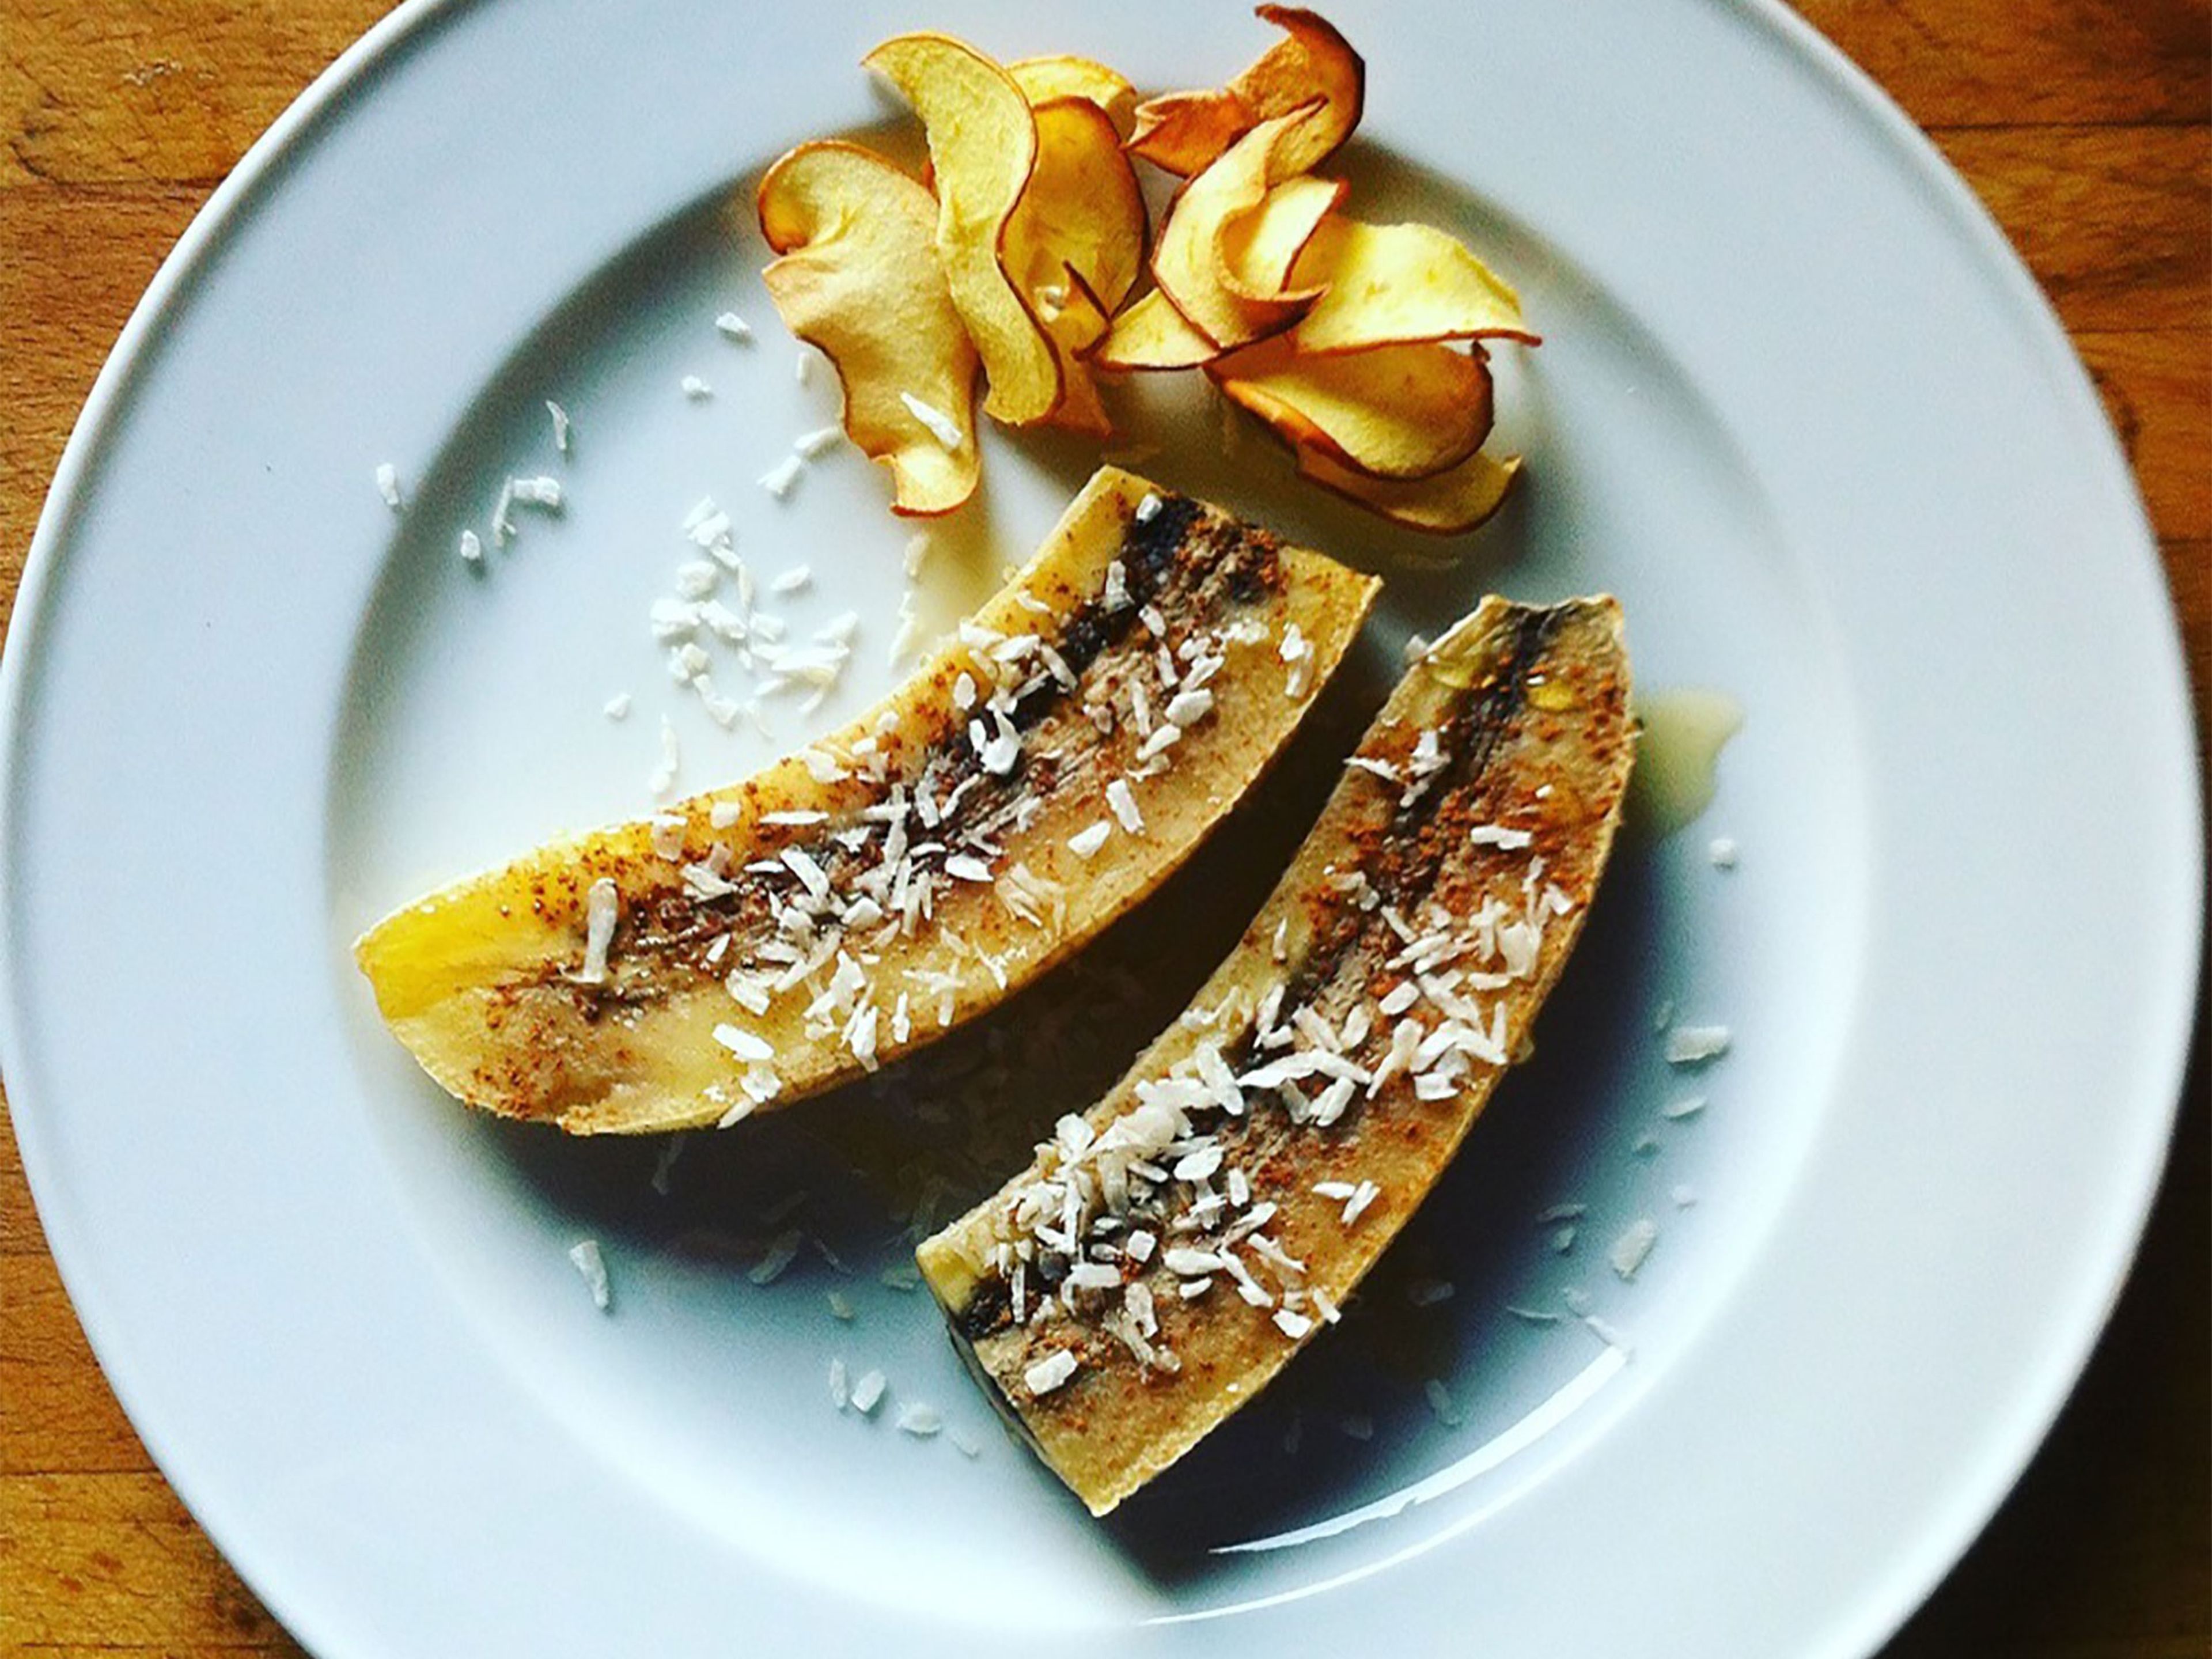 Halve the bananas, transfer to plates together with apple chips. Sprinkle with coconut flakes and pour agave syrup over bananas. Enjoy!